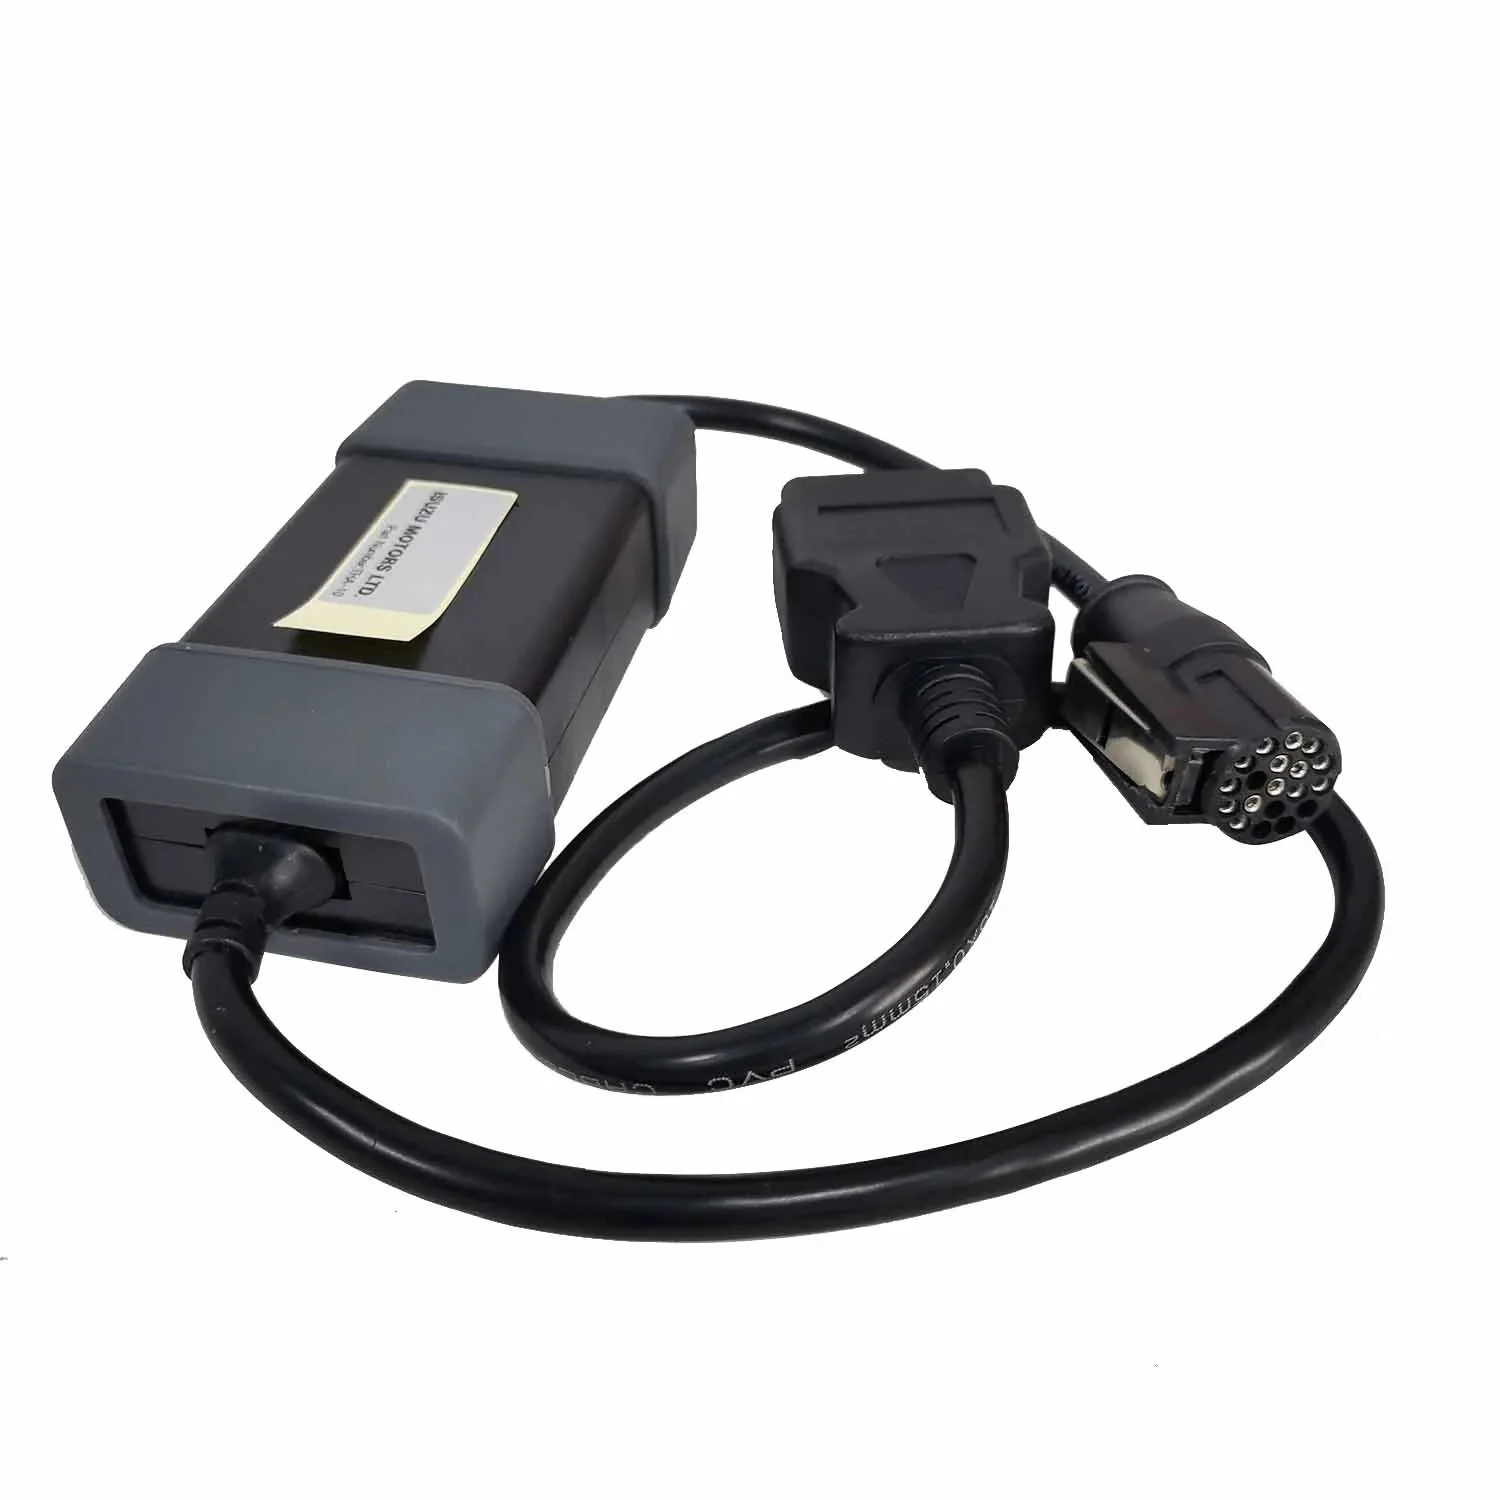 For ISUZU DC 24V Adapter Type II for ISU-ZU or Engine OBDII Diagnostic  Connector Truck Adapter for GM Tech 2 Diagnostic Tool Con